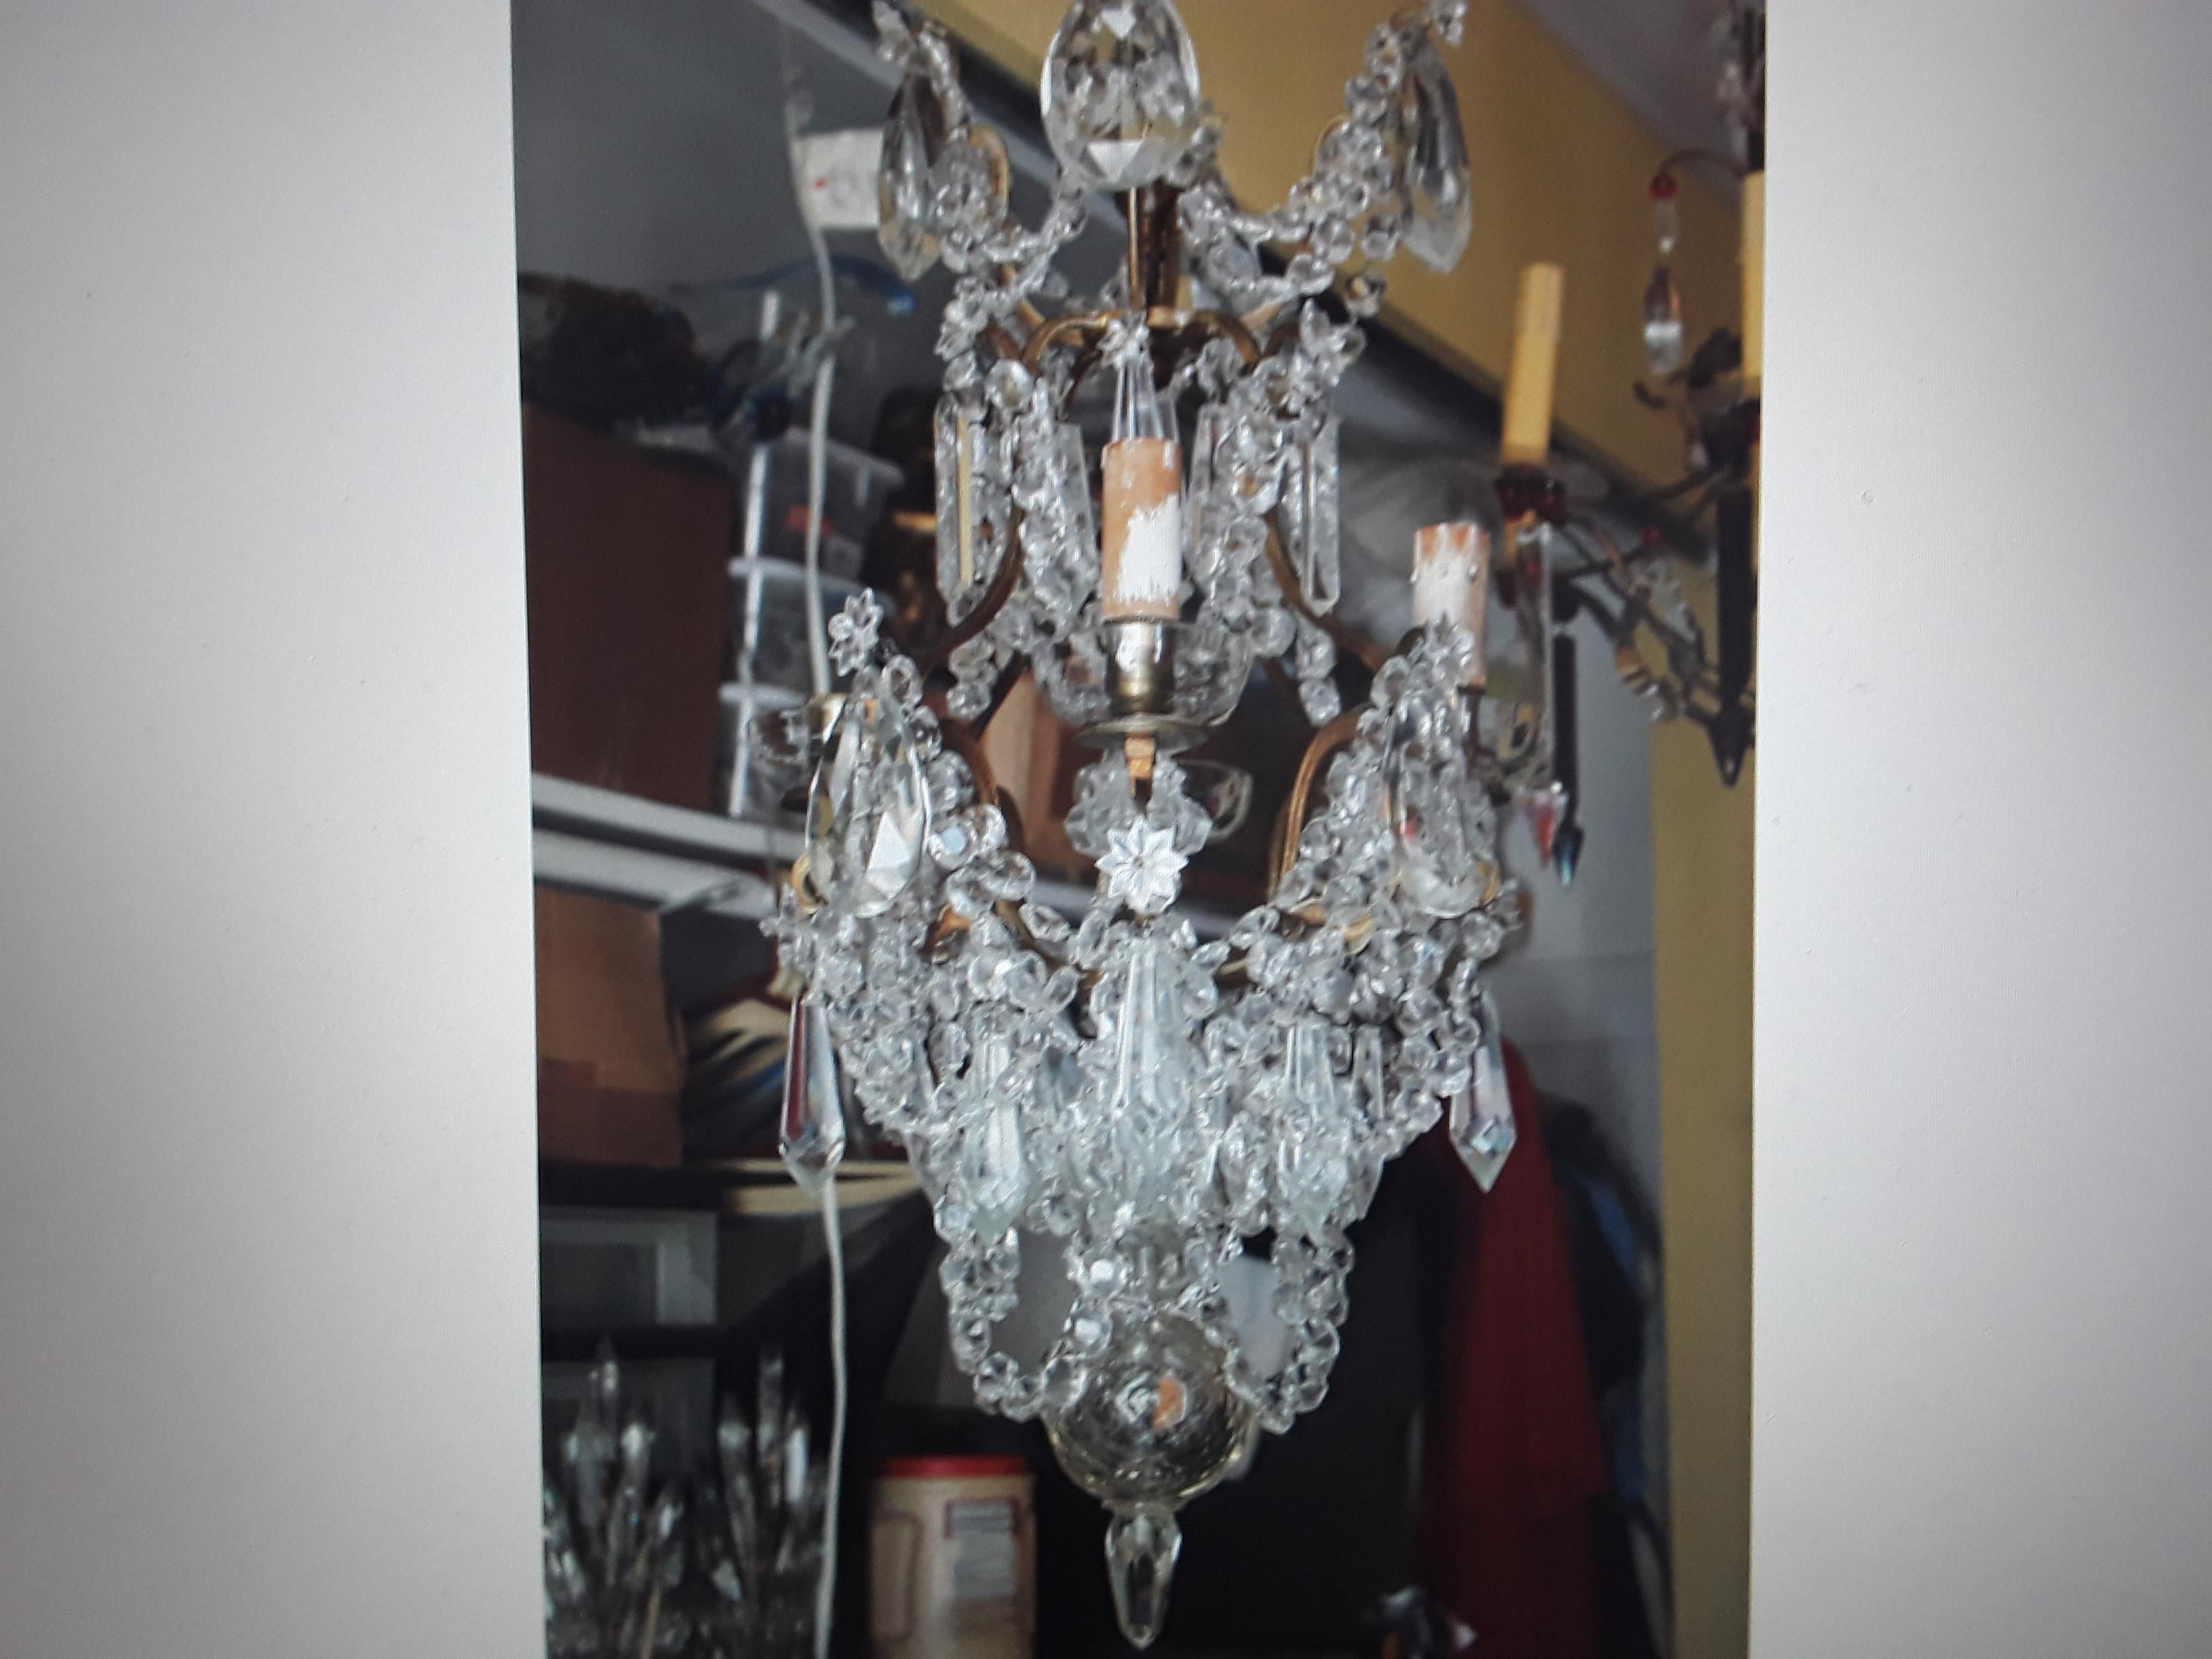 c1880 French Louis XVI Rococo style Bronze Frame/ Baccarat Crystal Chandelier. In the original unelectrified state. Easily wired for electric. Please note the high quality here. Baccarat crystal is amazing and just shines like no other crystal.